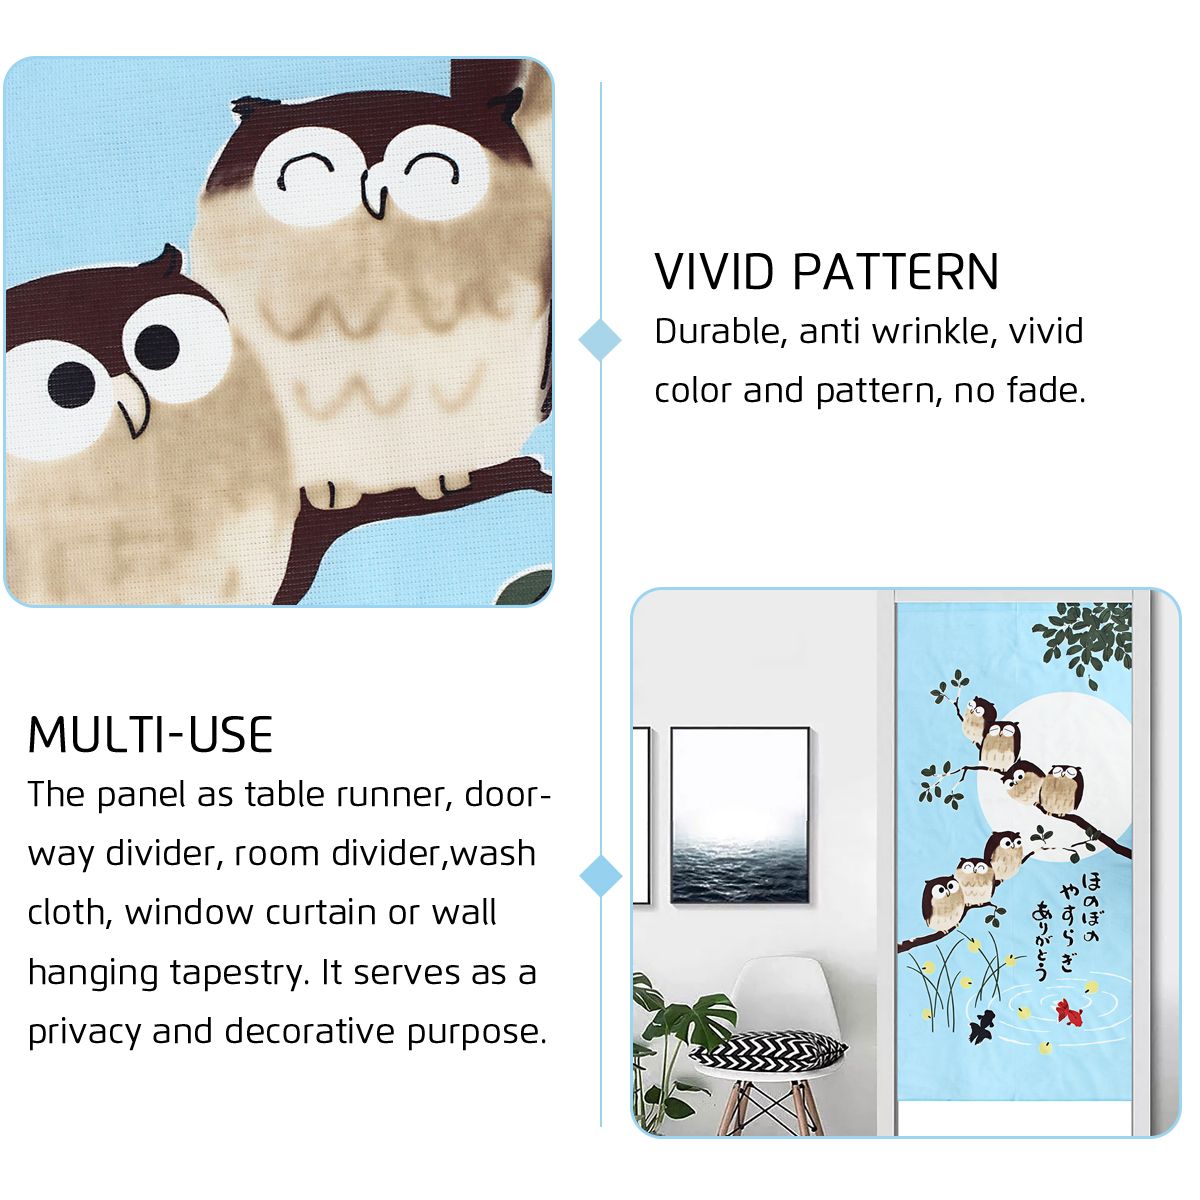 Japanese-Doorway-Curtains-Owls-Branch-Home-Canteen-Cafe-Luck-Pattern-Doorway-Privacy-Tapestry-Home-1543274